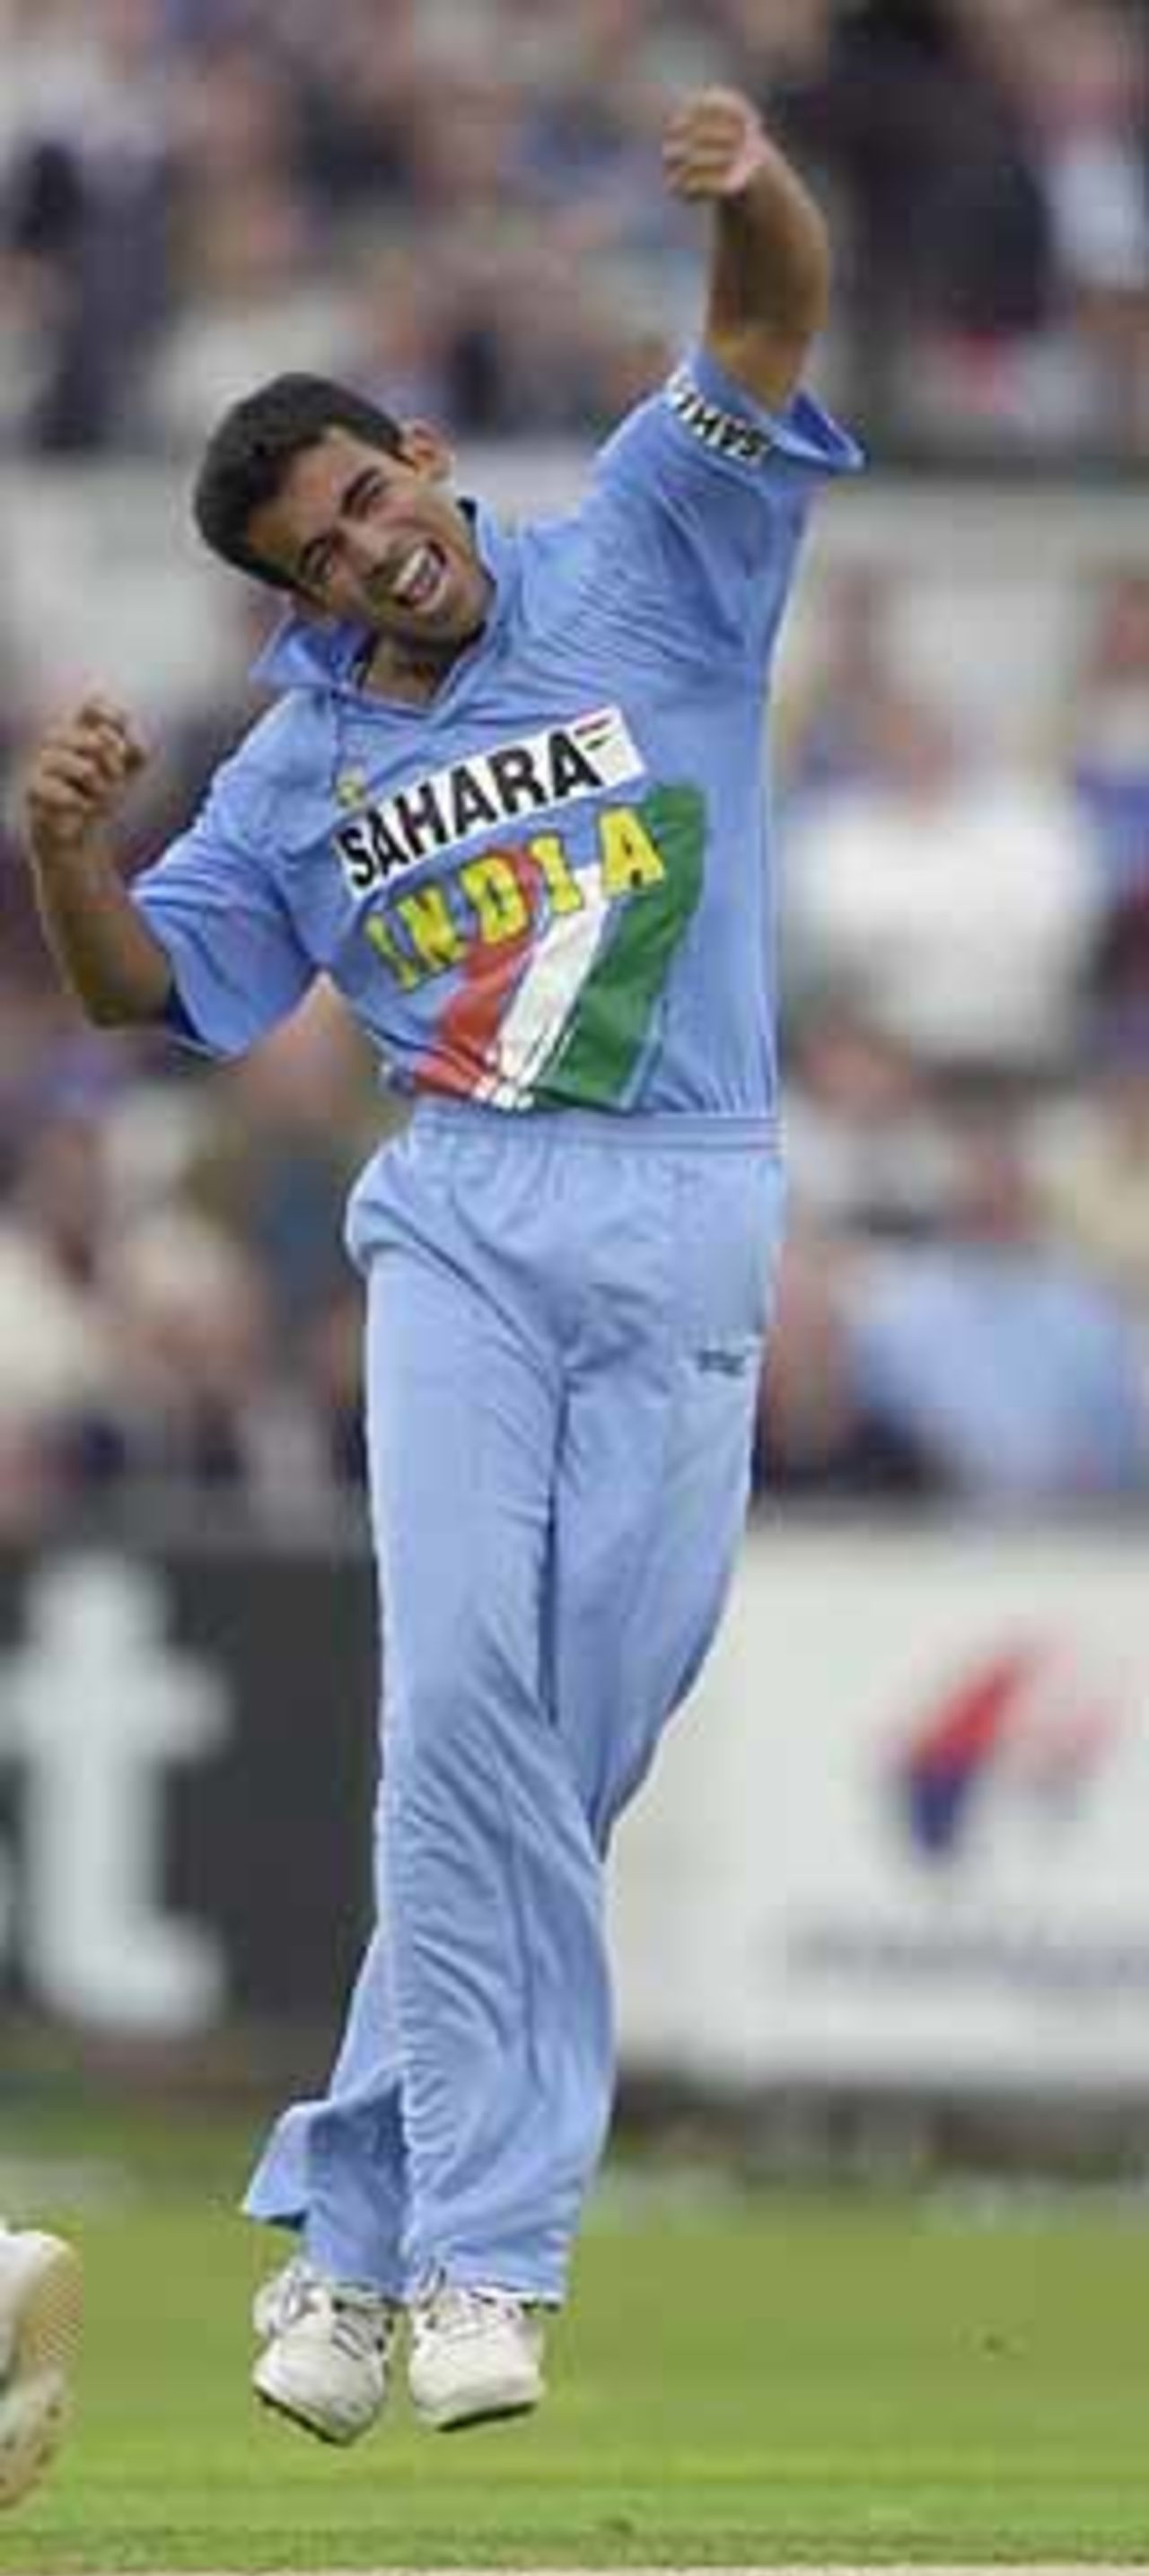 Zaheer Khan shows his delight at the wicket of Trescothick, England v India at Chester-le-Street, July 2002